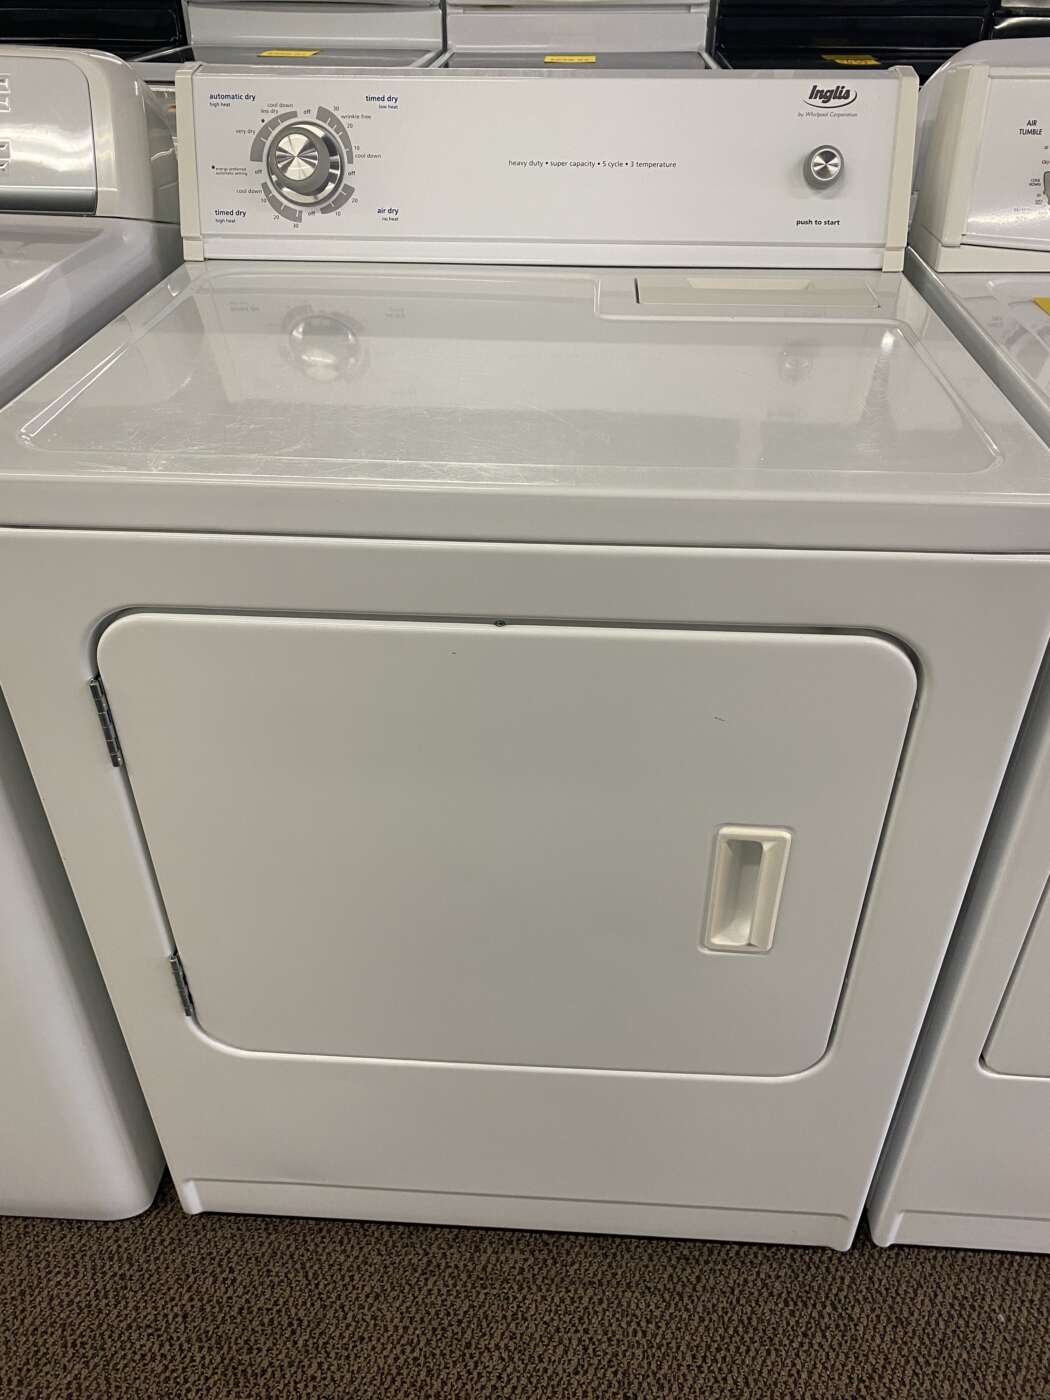 Reconditioned INGLIS (By WHIRLPOOL) Electric Dryer